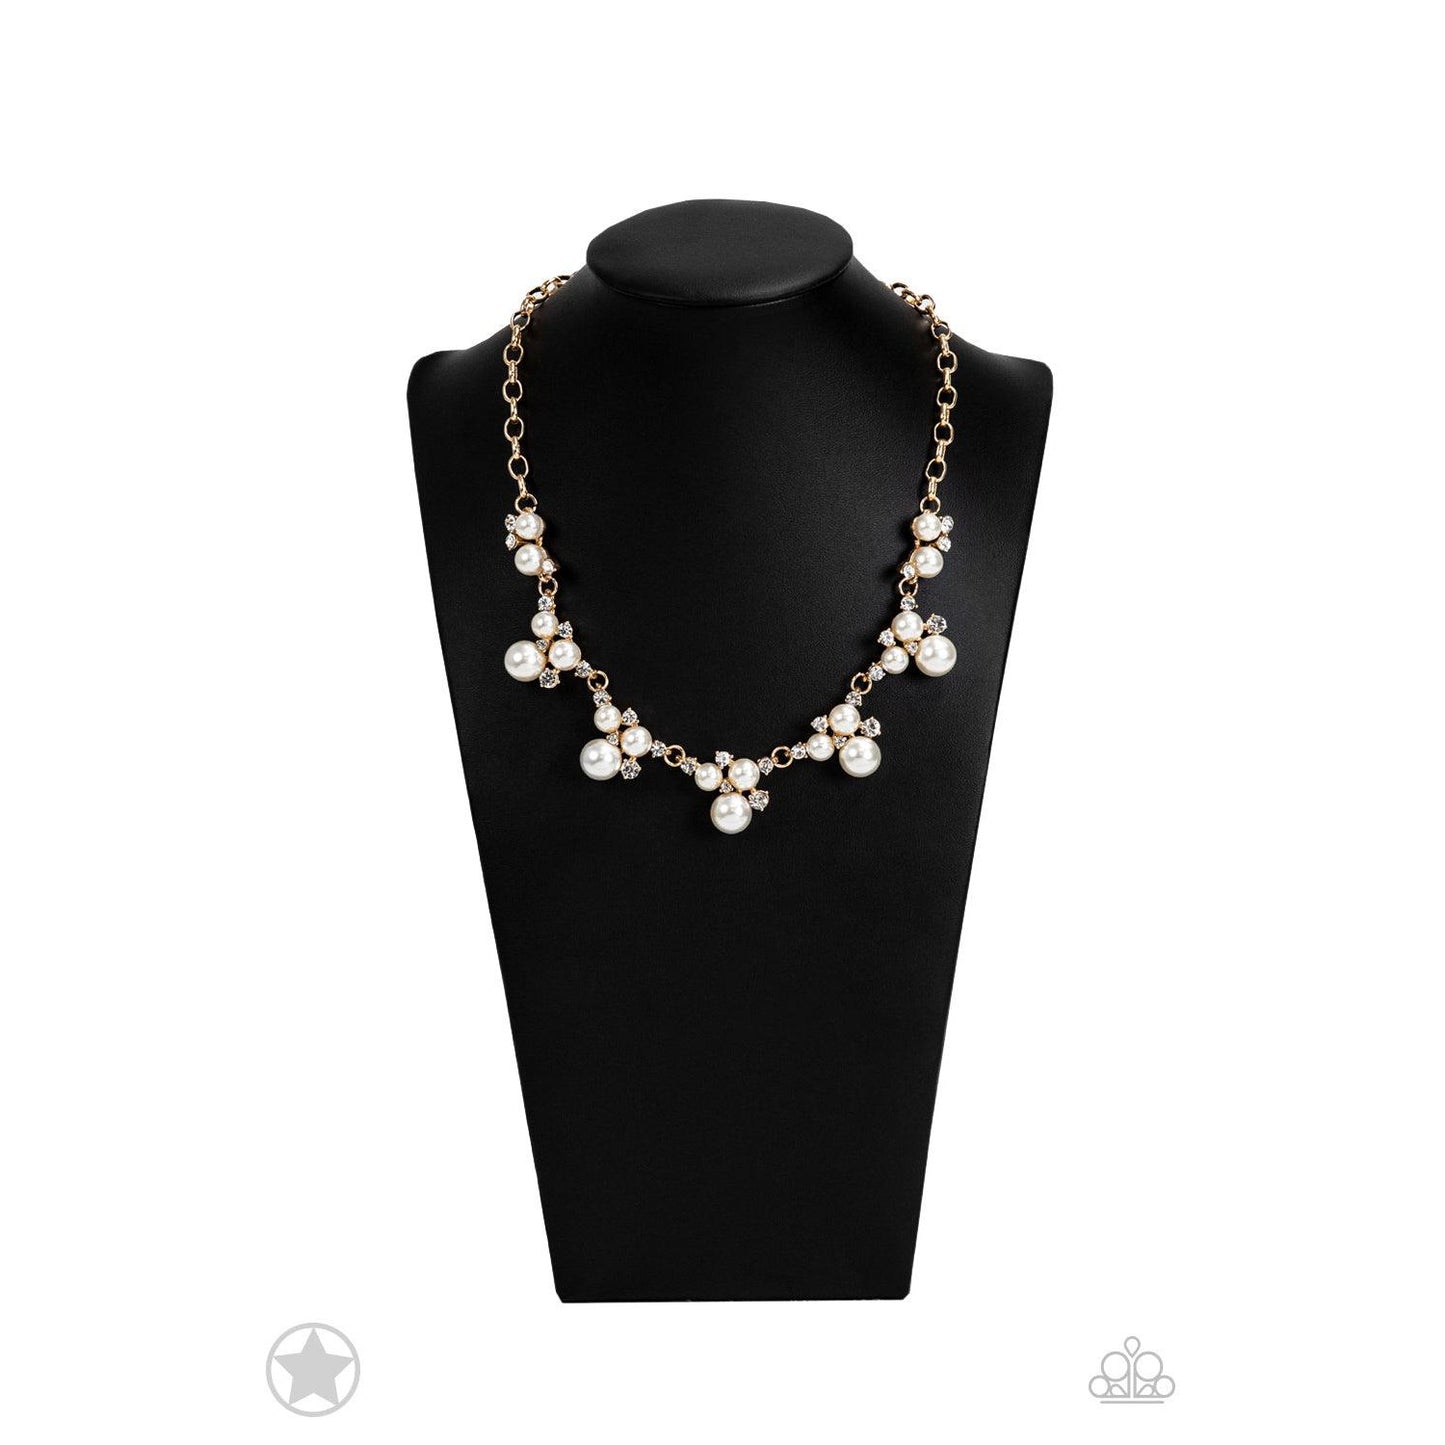 Toast To Perfection - Gold Pearl Blockbuster Necklace - A Large Selection Hand-Chains And Jewelry On rainbowartsreview,Women's Jewelry | Necklaces, Earrings, Bracelets